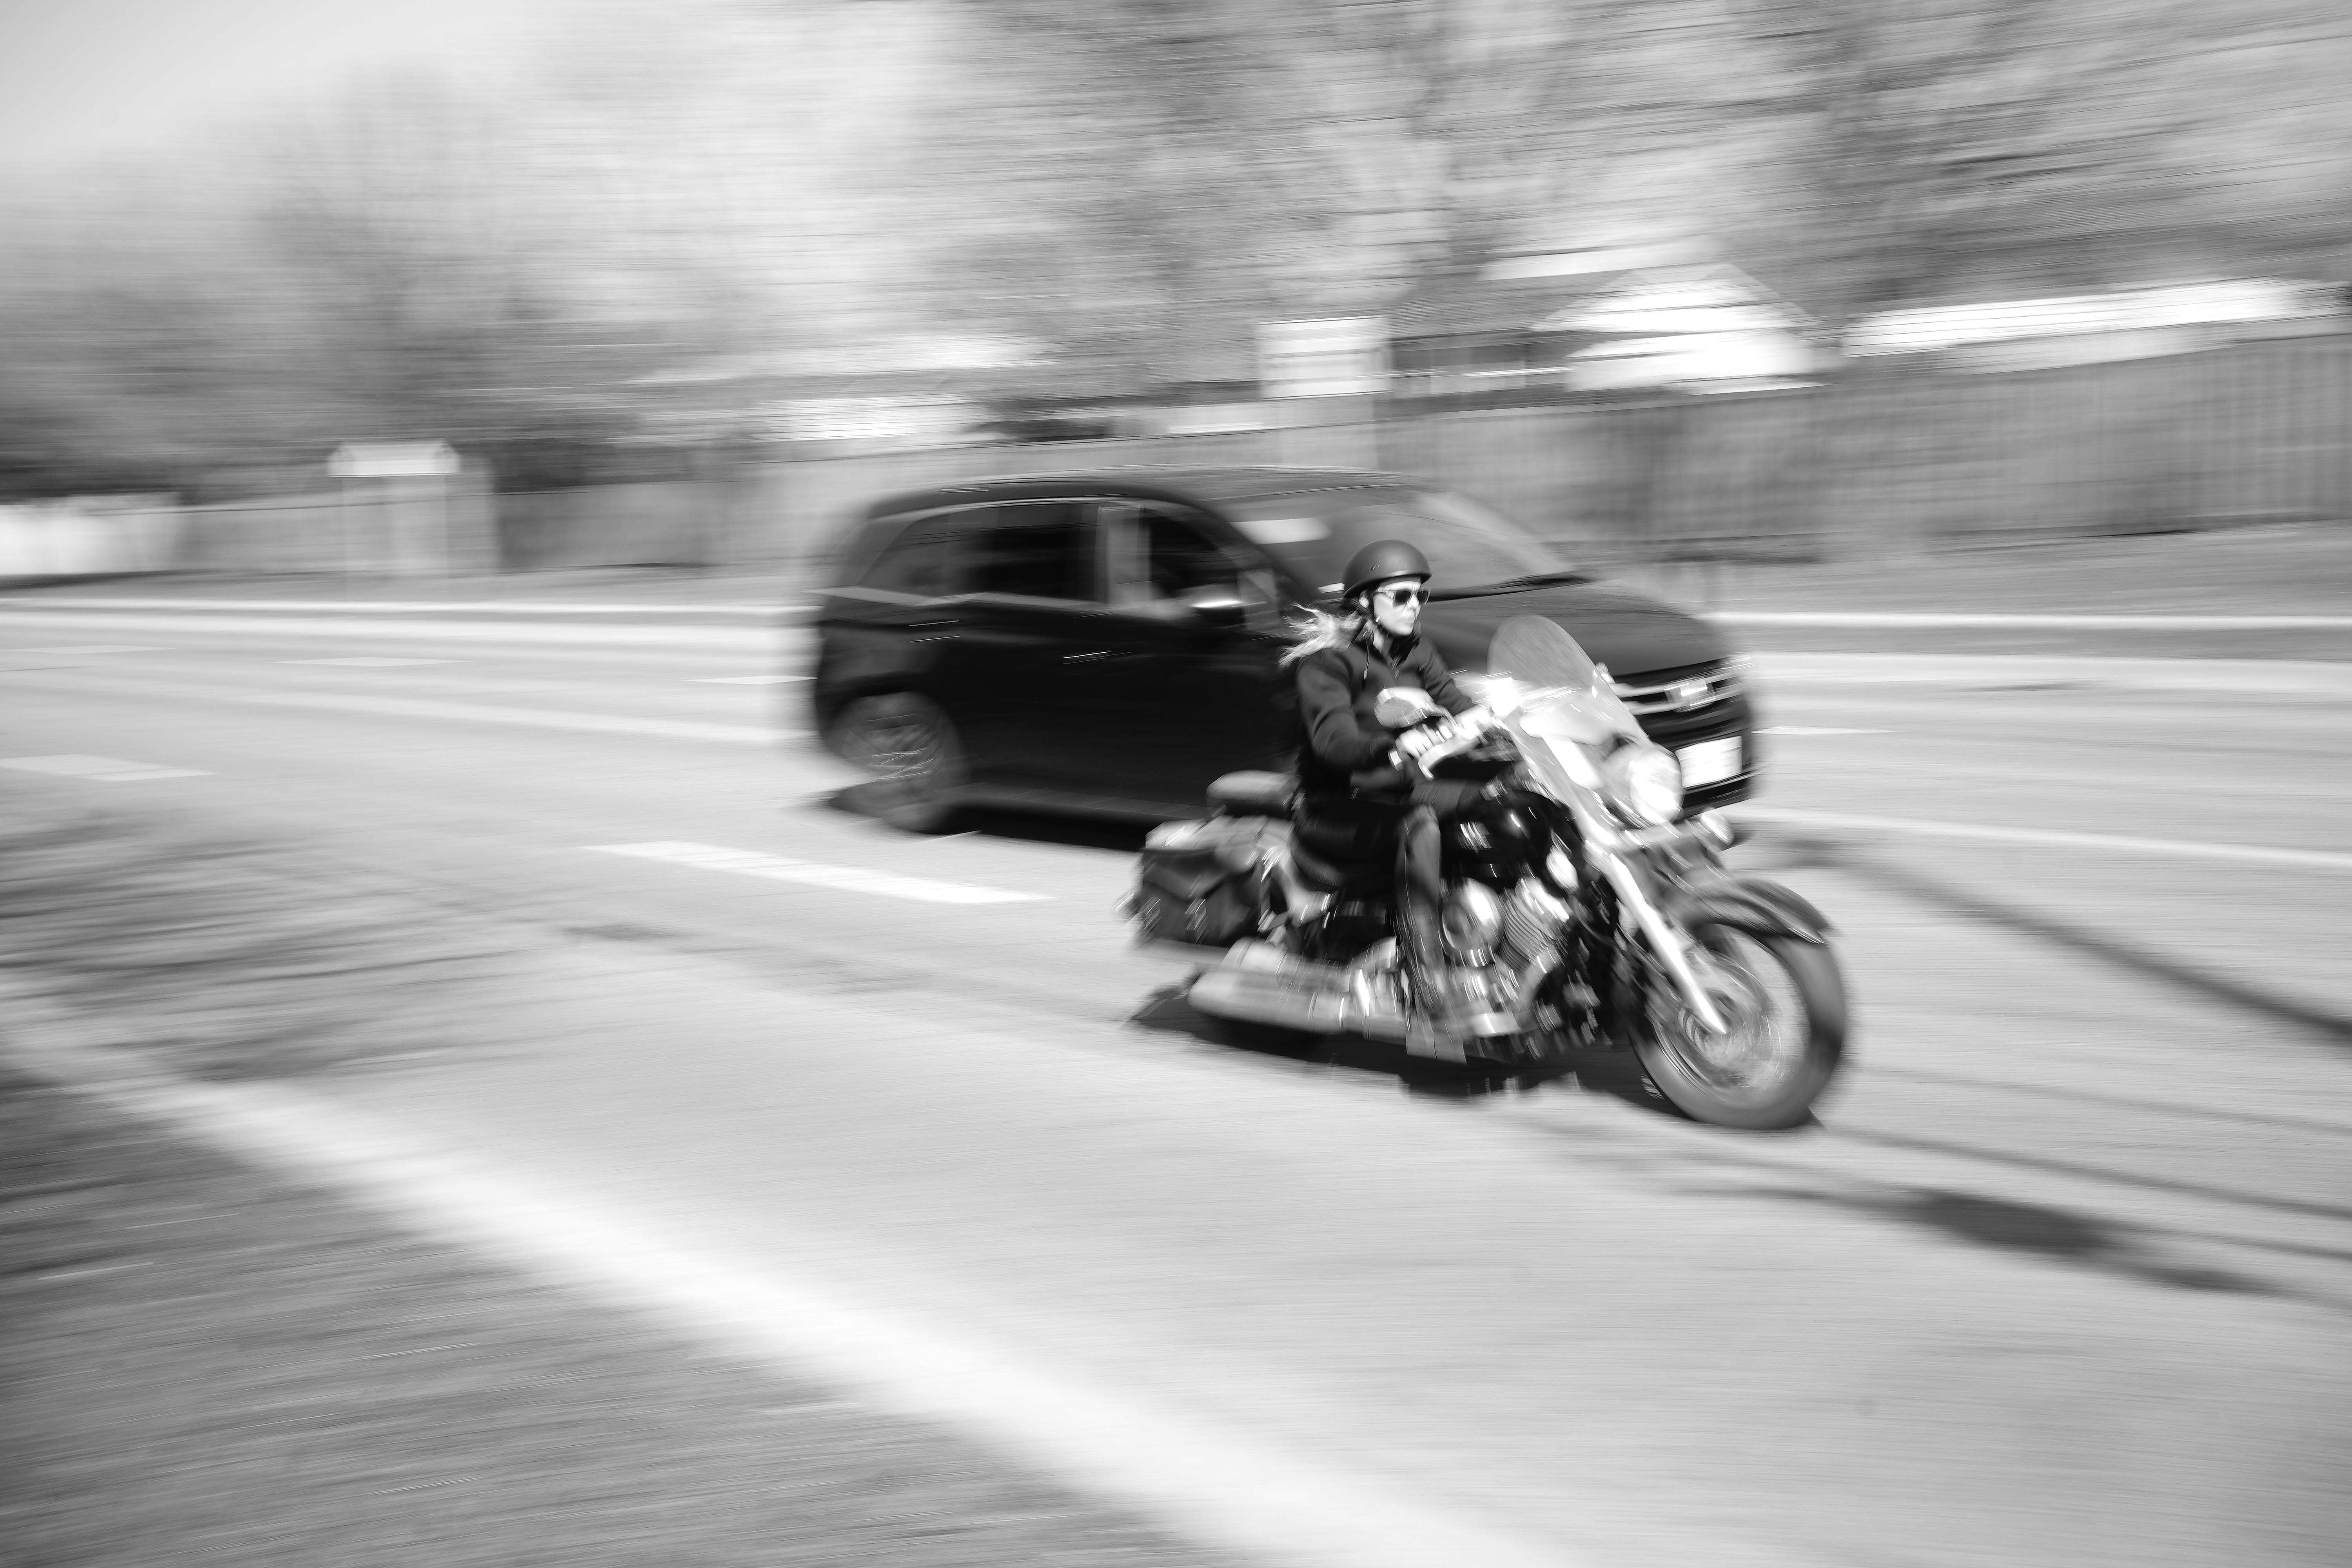 Man riding a motorcycle next to a minivan on the highway; image by VanveenJF, via unsplash.com.